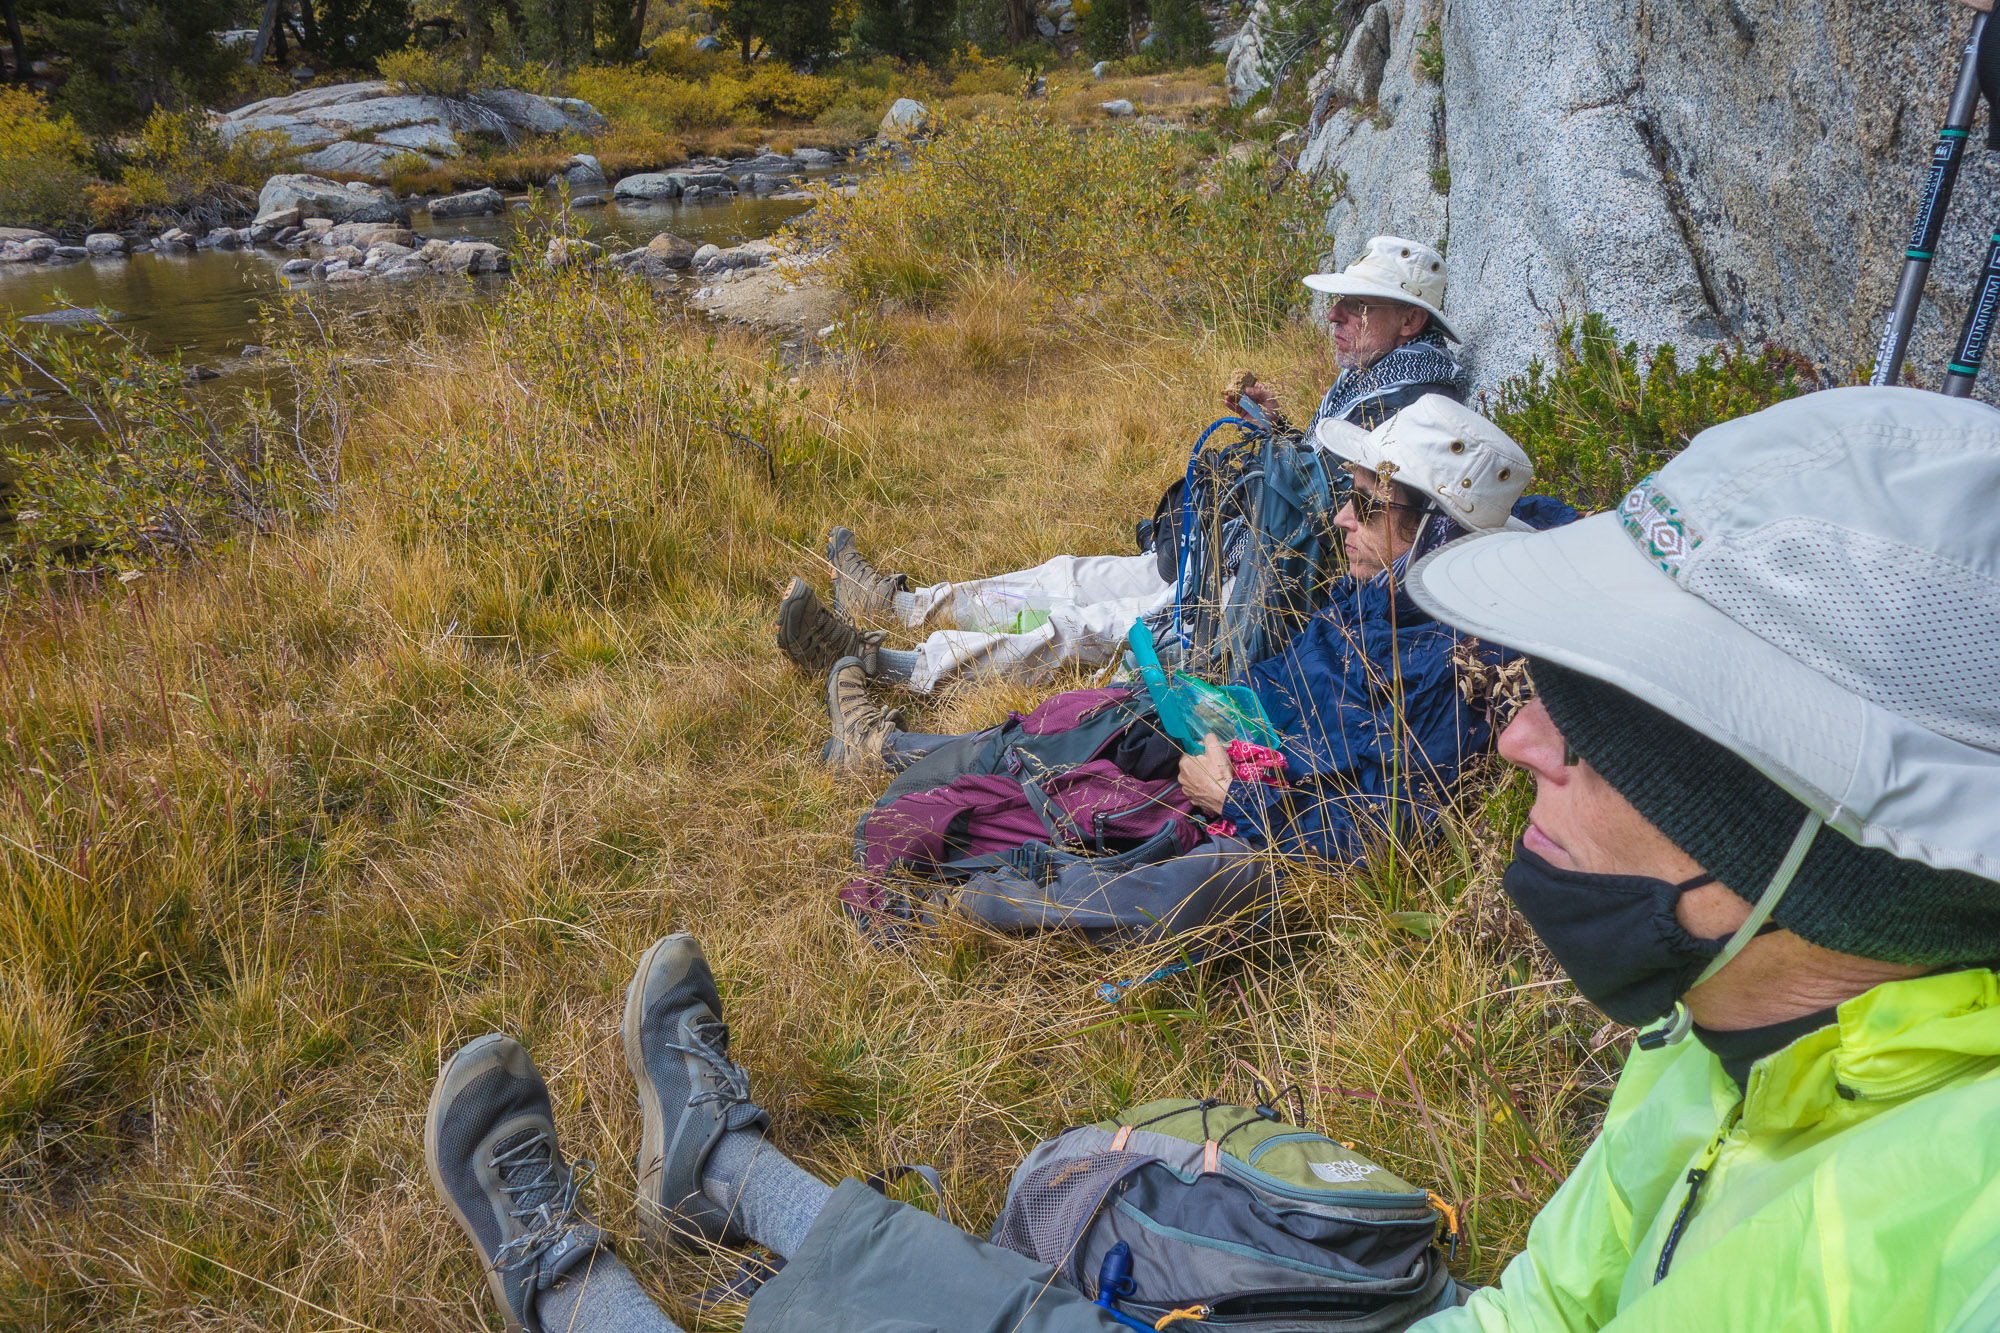 We enjoyed luncheon on the soft grassy shore of Bishop Creek, south of Dingleberry Lake.